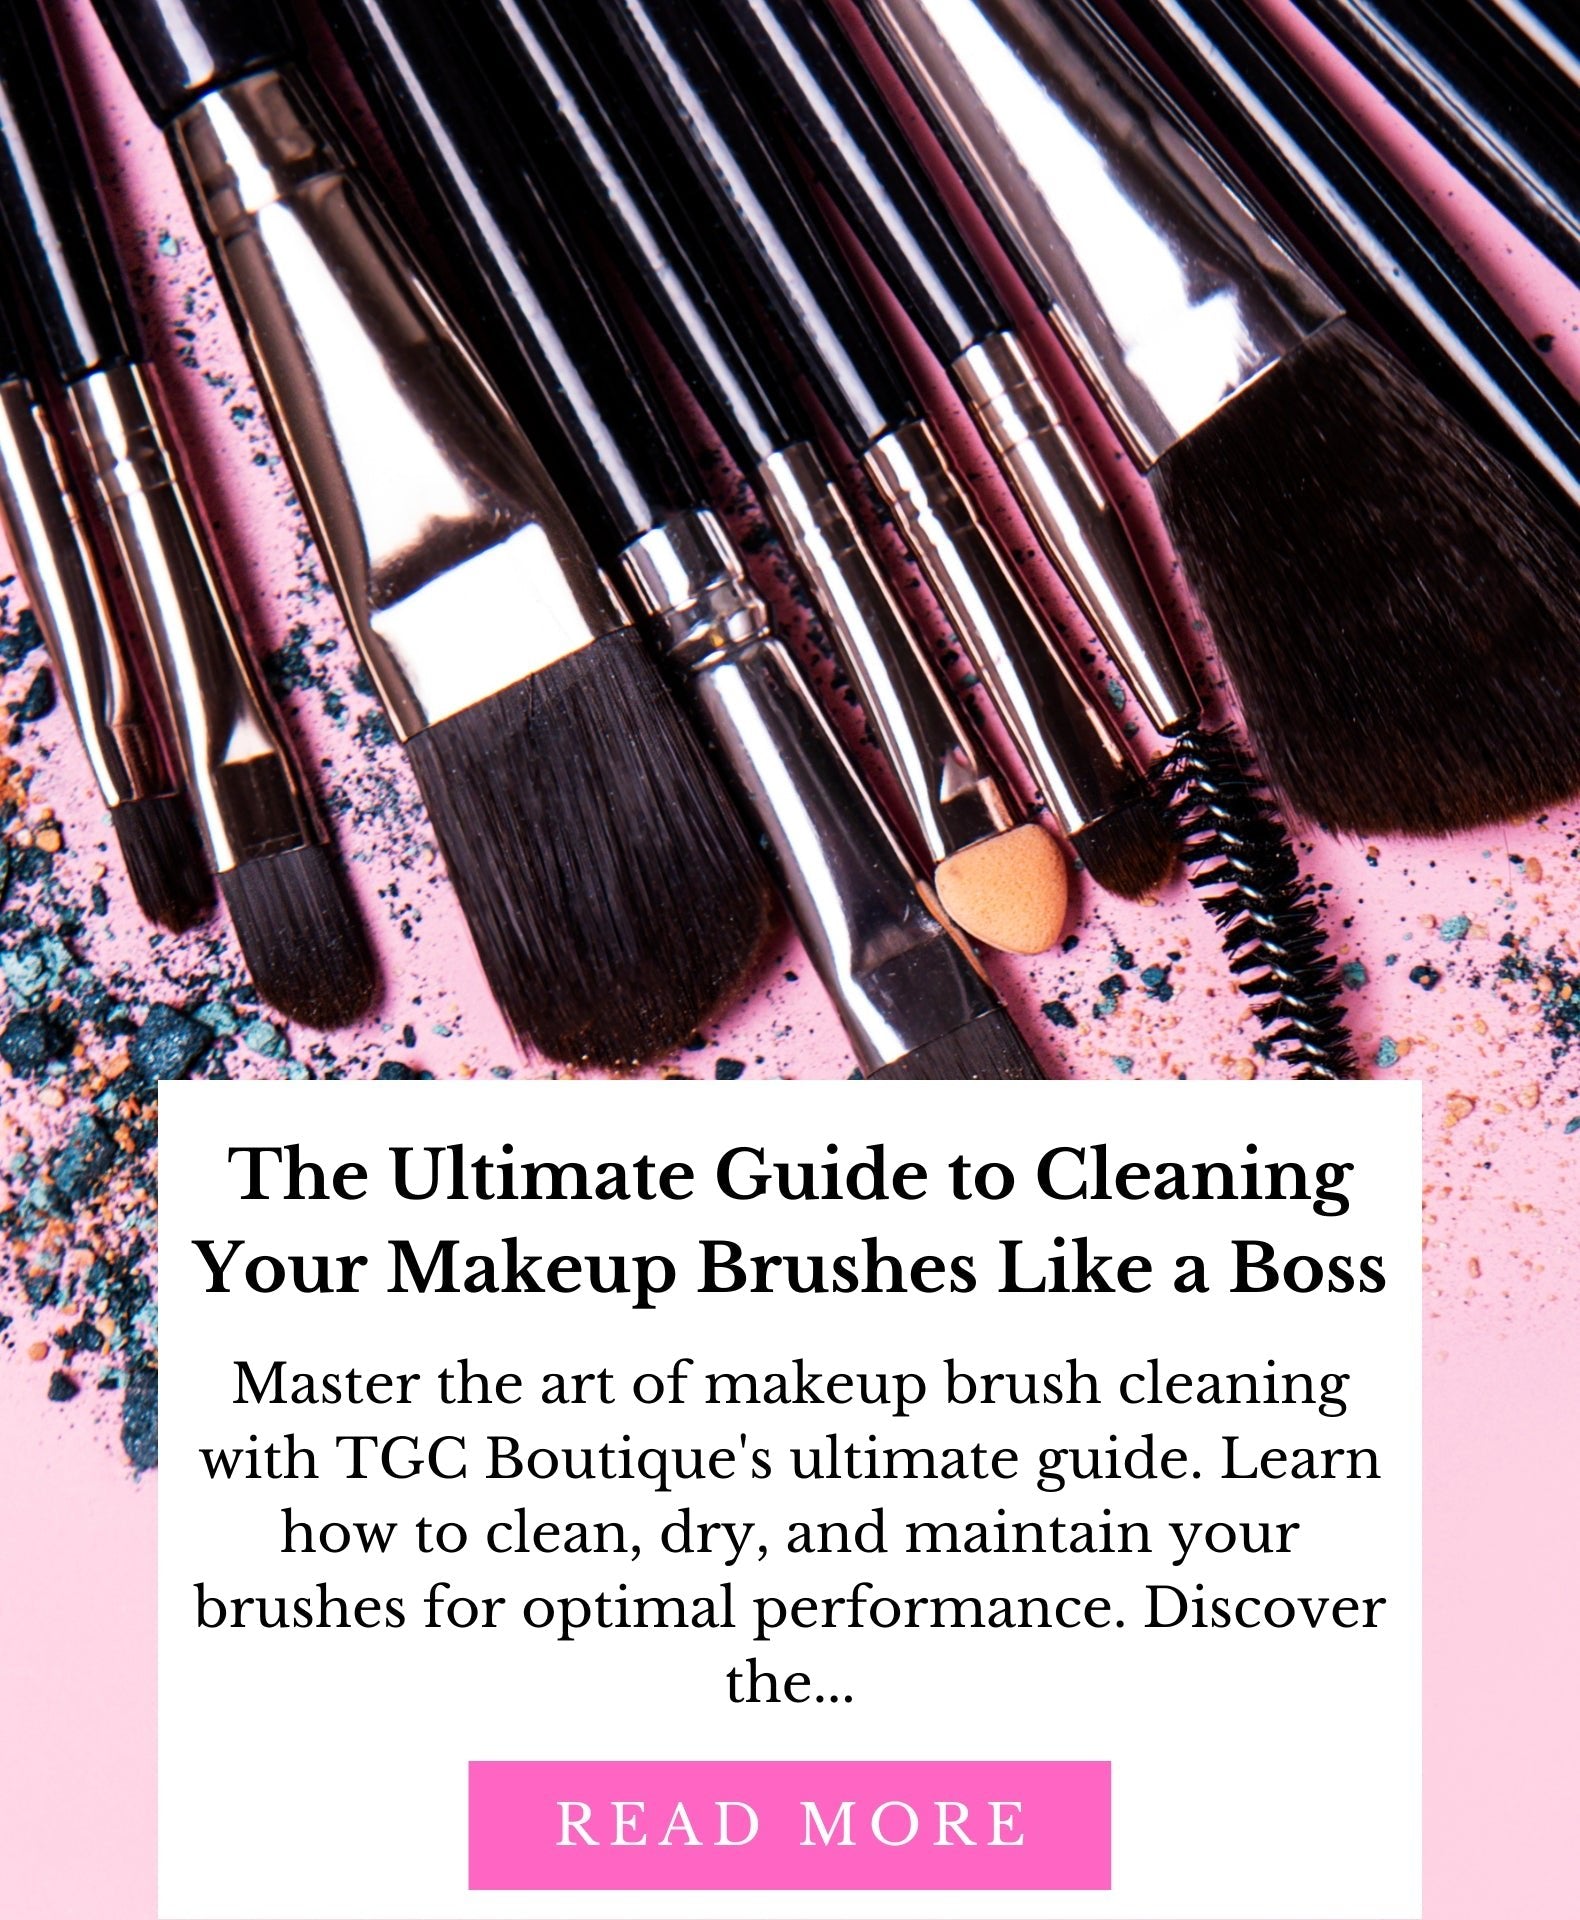 The Ultimate Guide to Cleaning Your Makeup Brushes Like a Boss - TGC Boutique